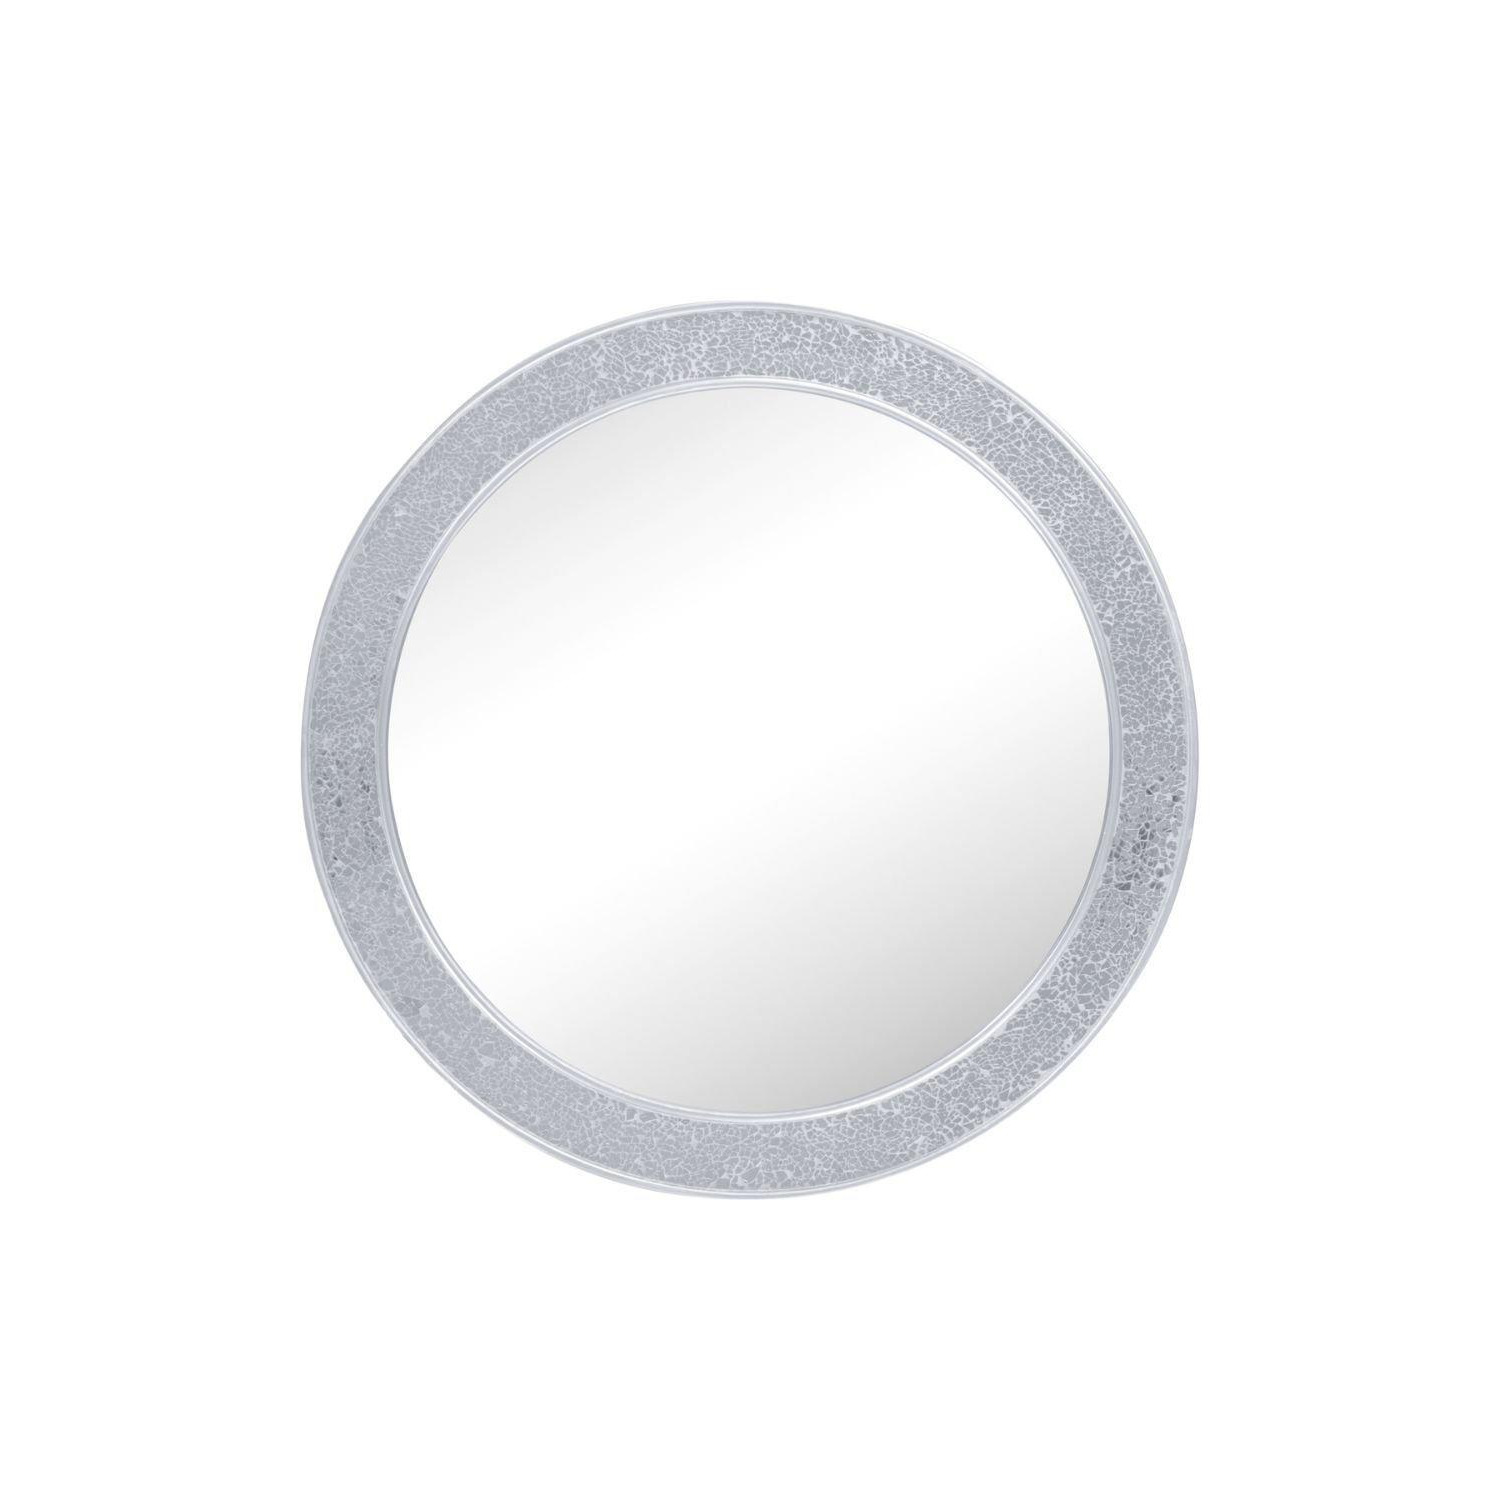 Lewis Crackle Mosaic Round Wall Mirror Silver 74cm - image 1